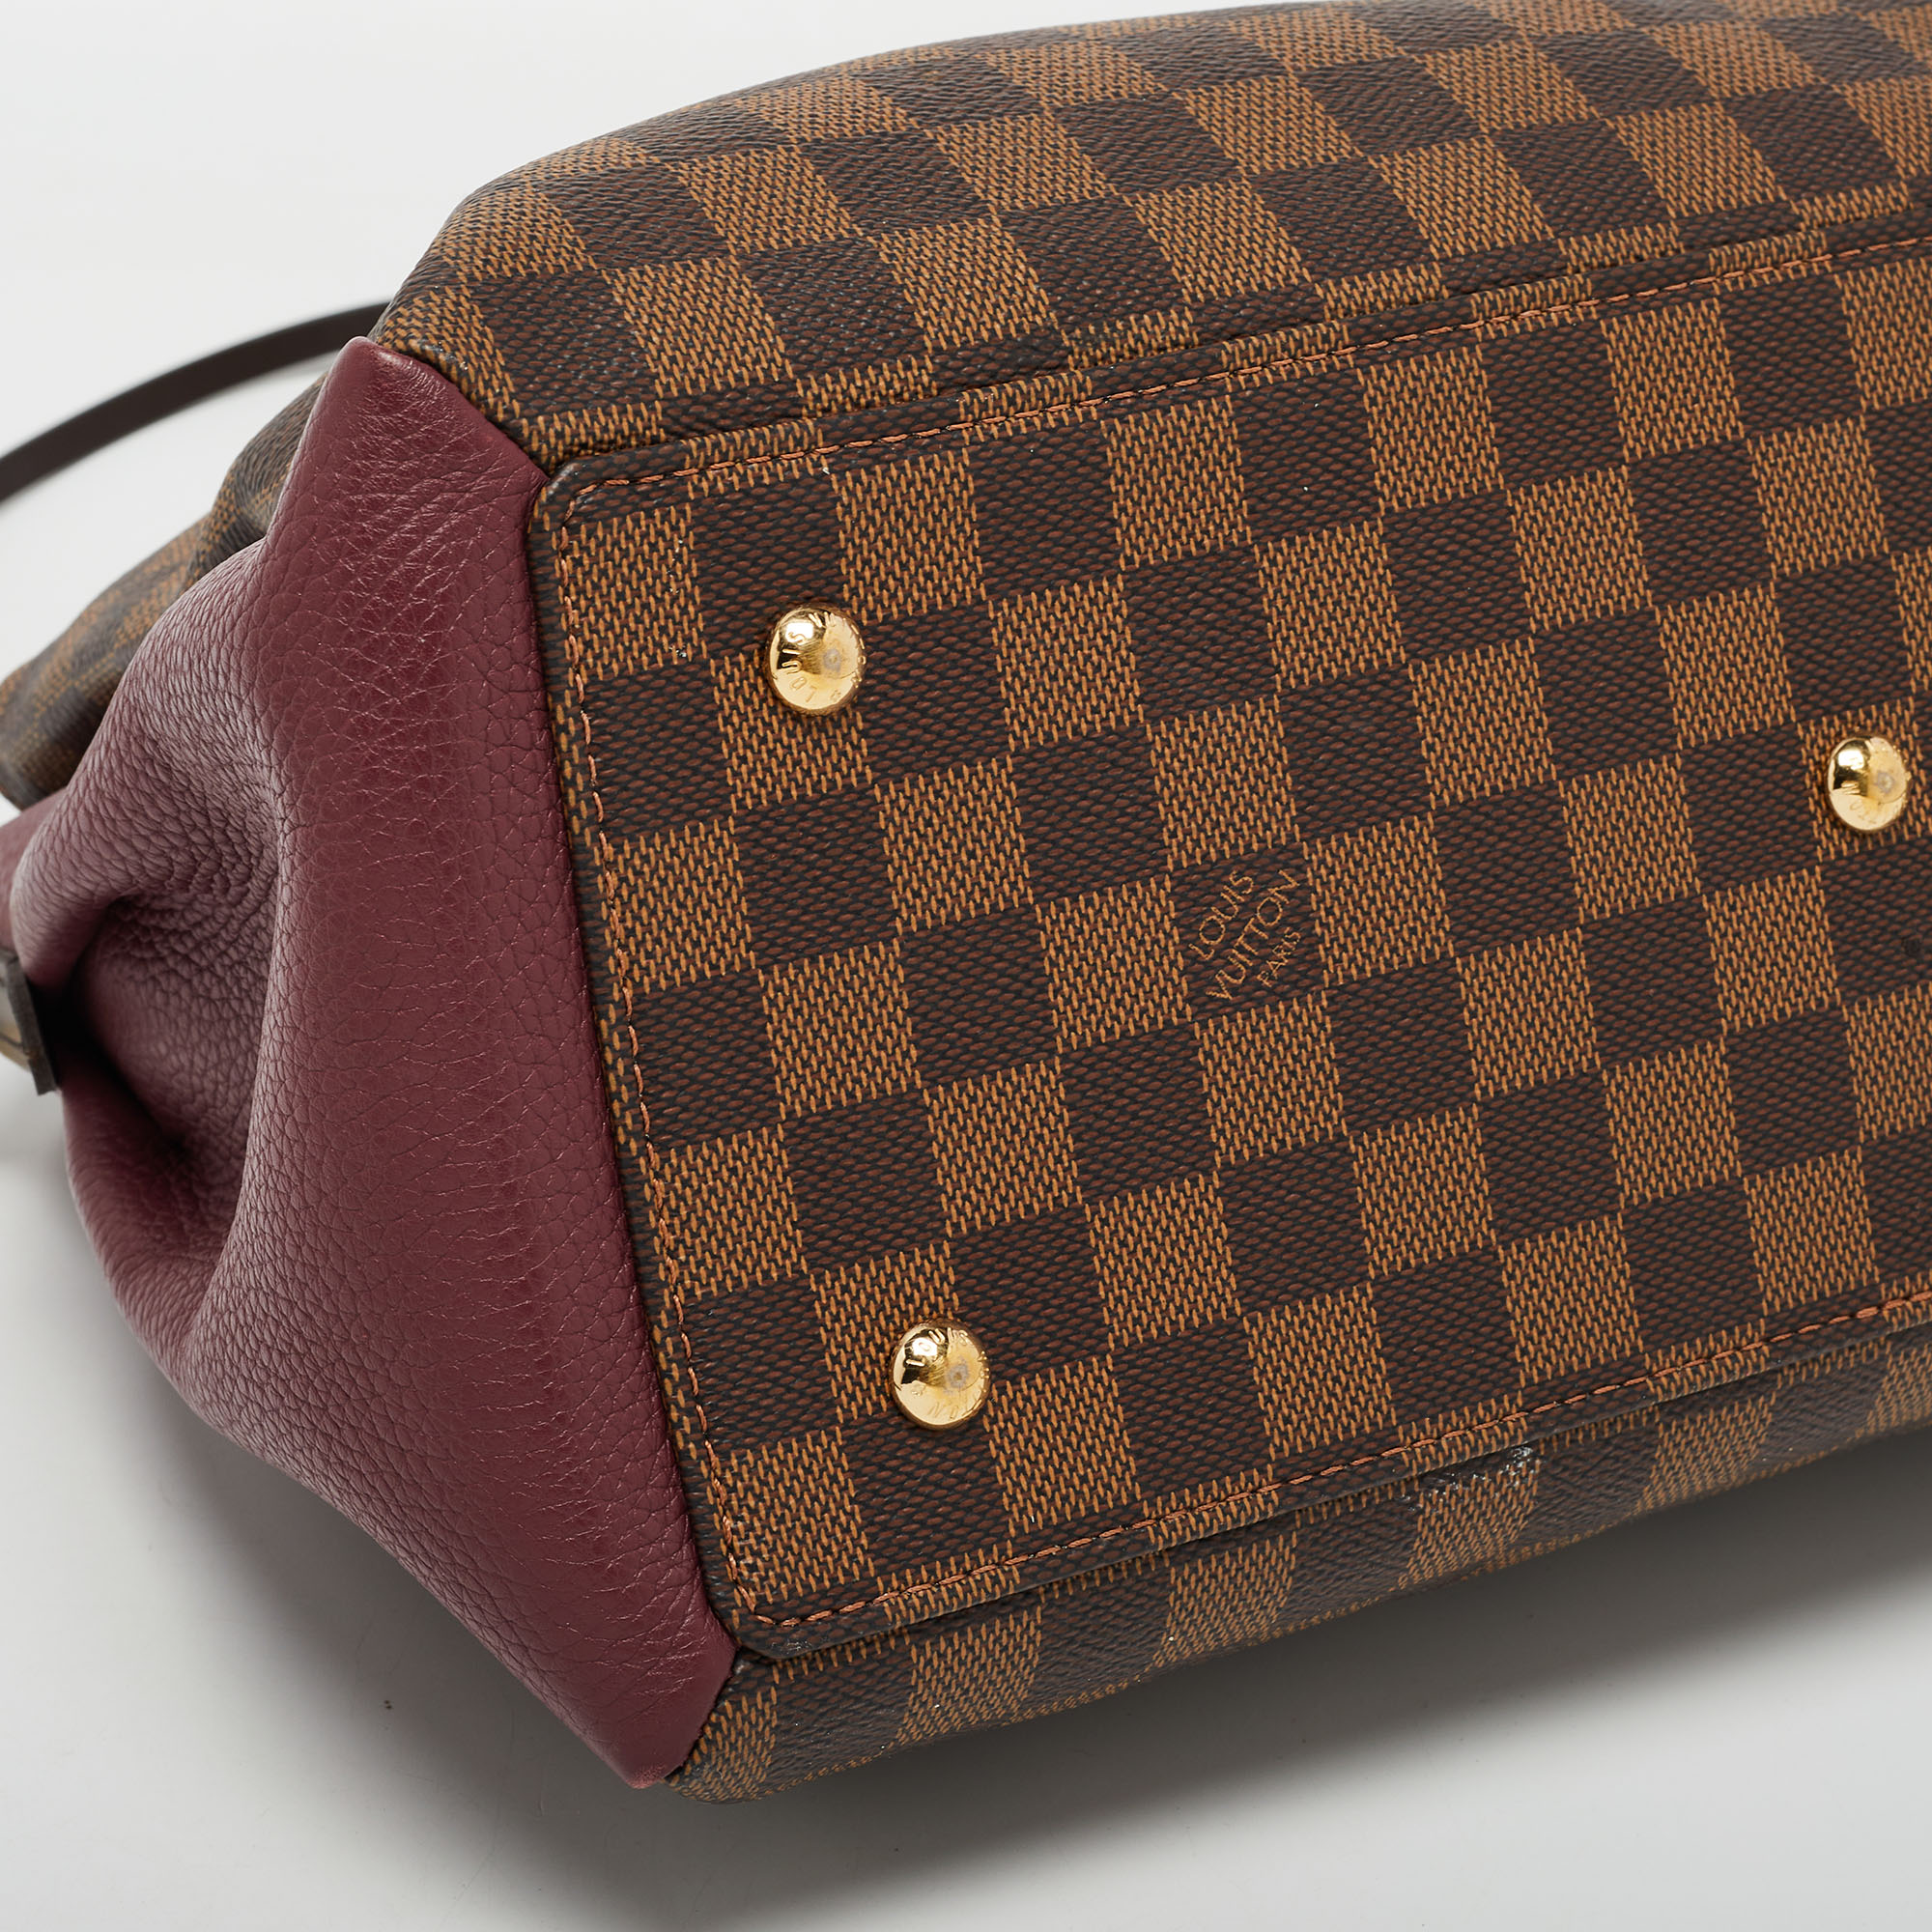 Louis Vuitton Tote Normandy Damier Ebene Ebene/White in Cuir  Taurillon/Canvas/Shearling with Gold-tone - US